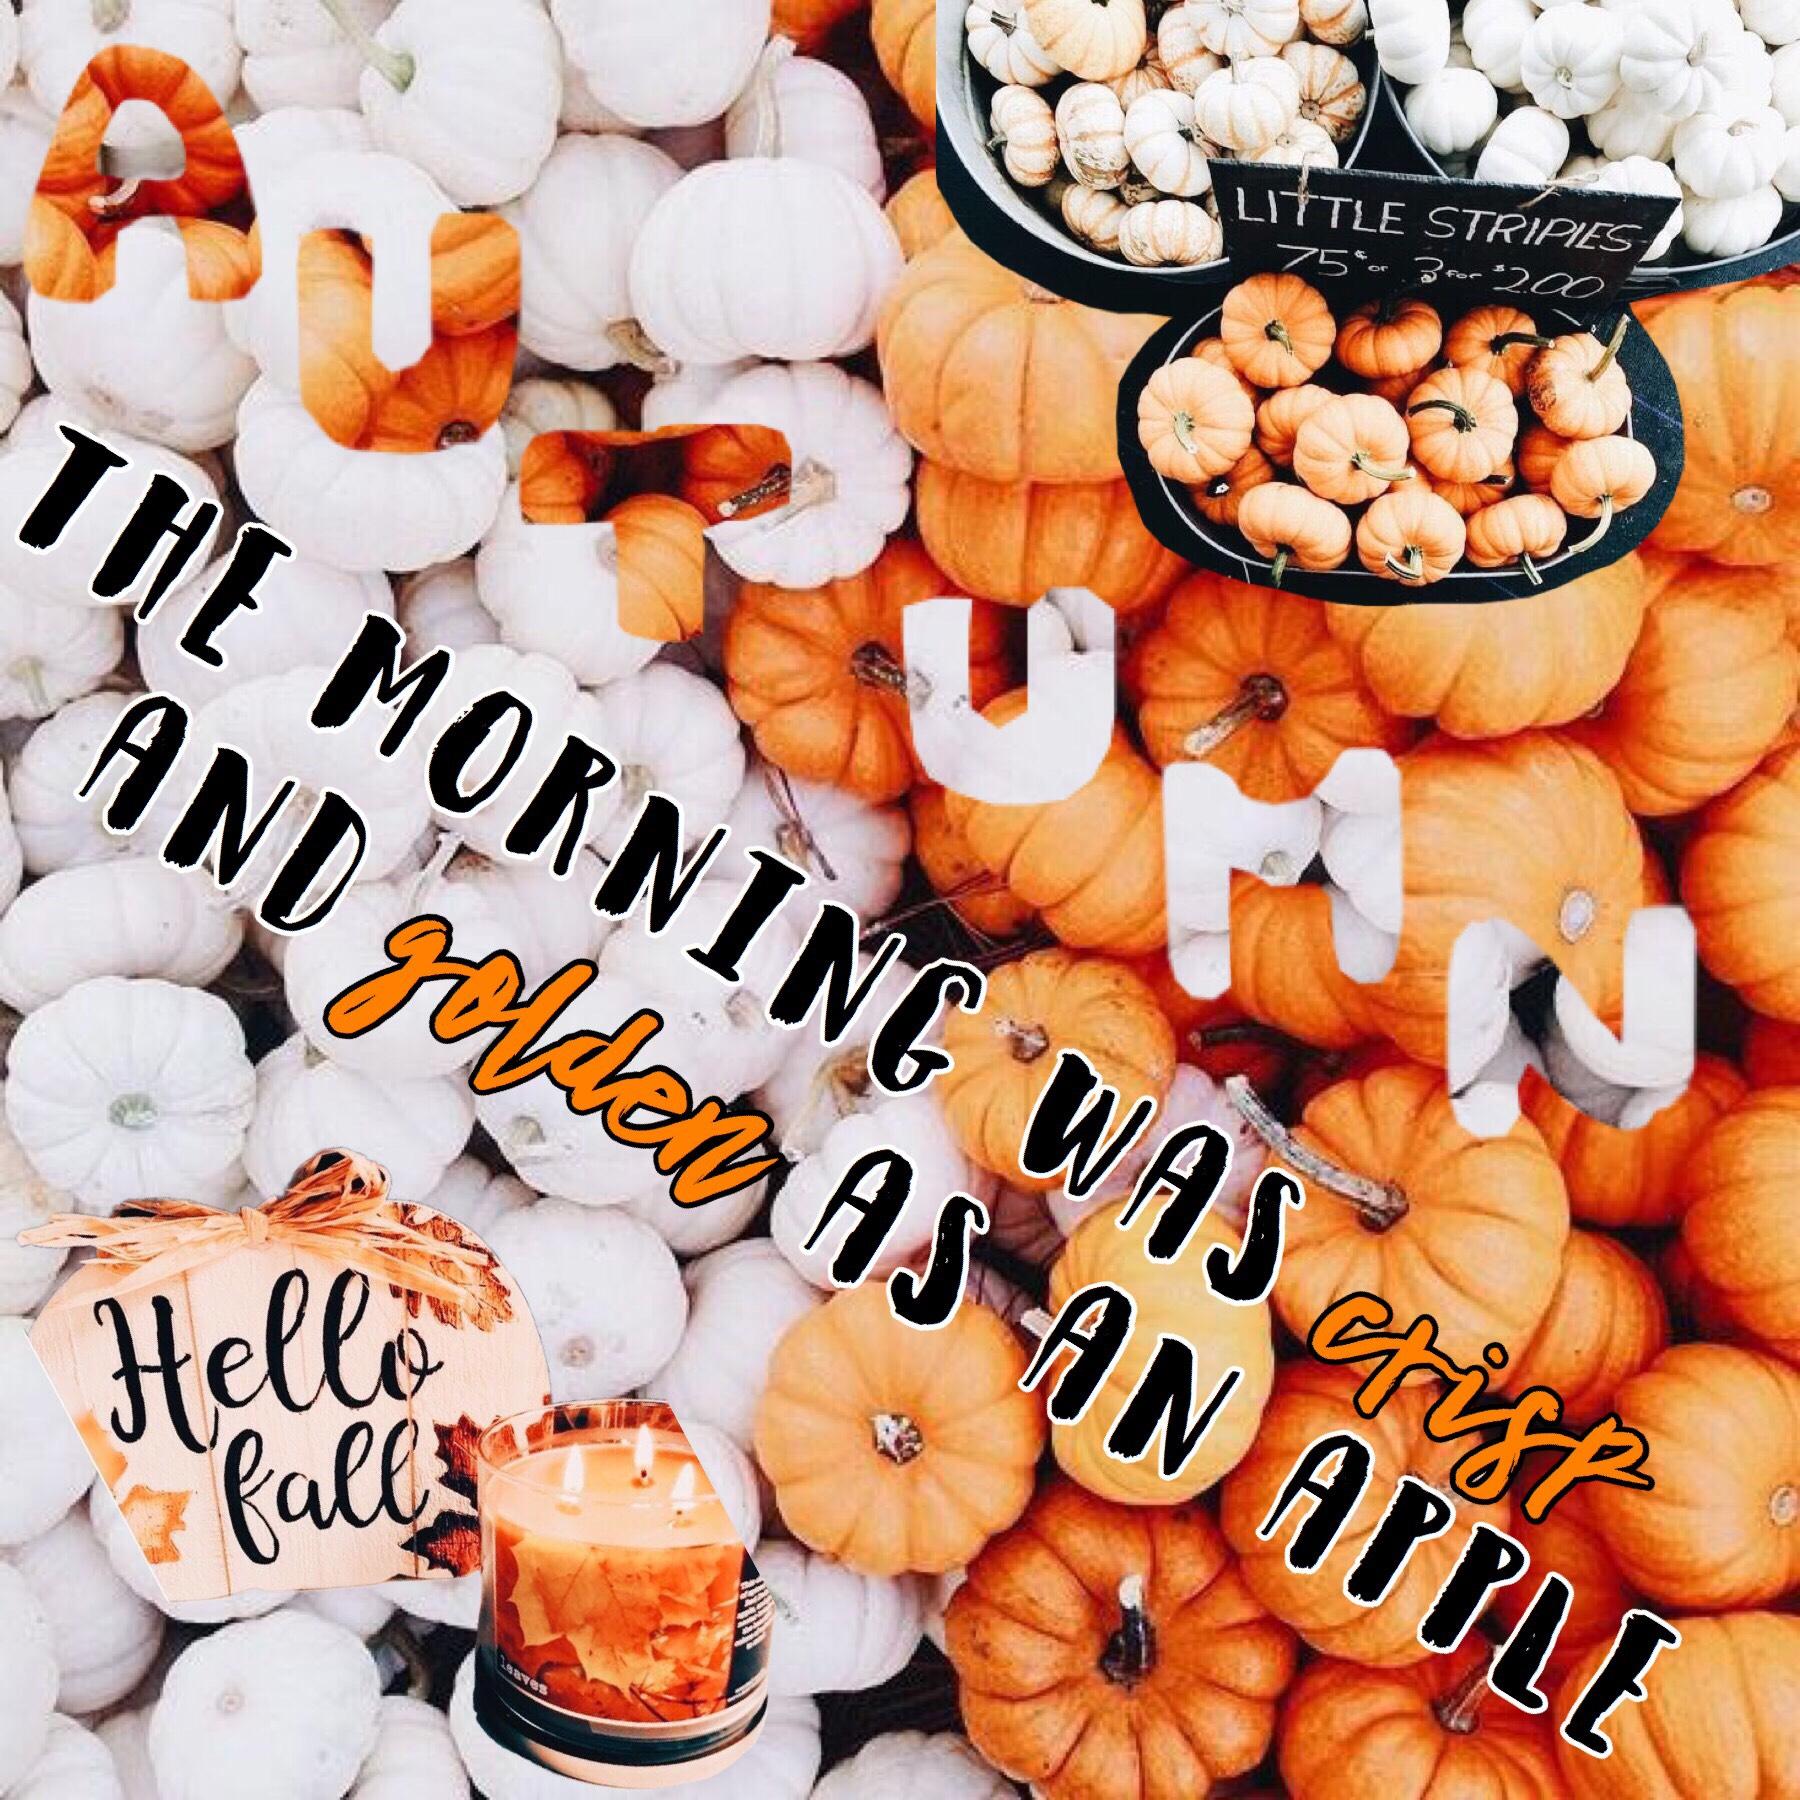 🎃 t a p 🎃

sorry I haven’t posted in so long, I’ve been so busy this month

currently making my Halloween costume, I’ll post a pic when I’m done

entry to @wanderingdreams’s mega collab